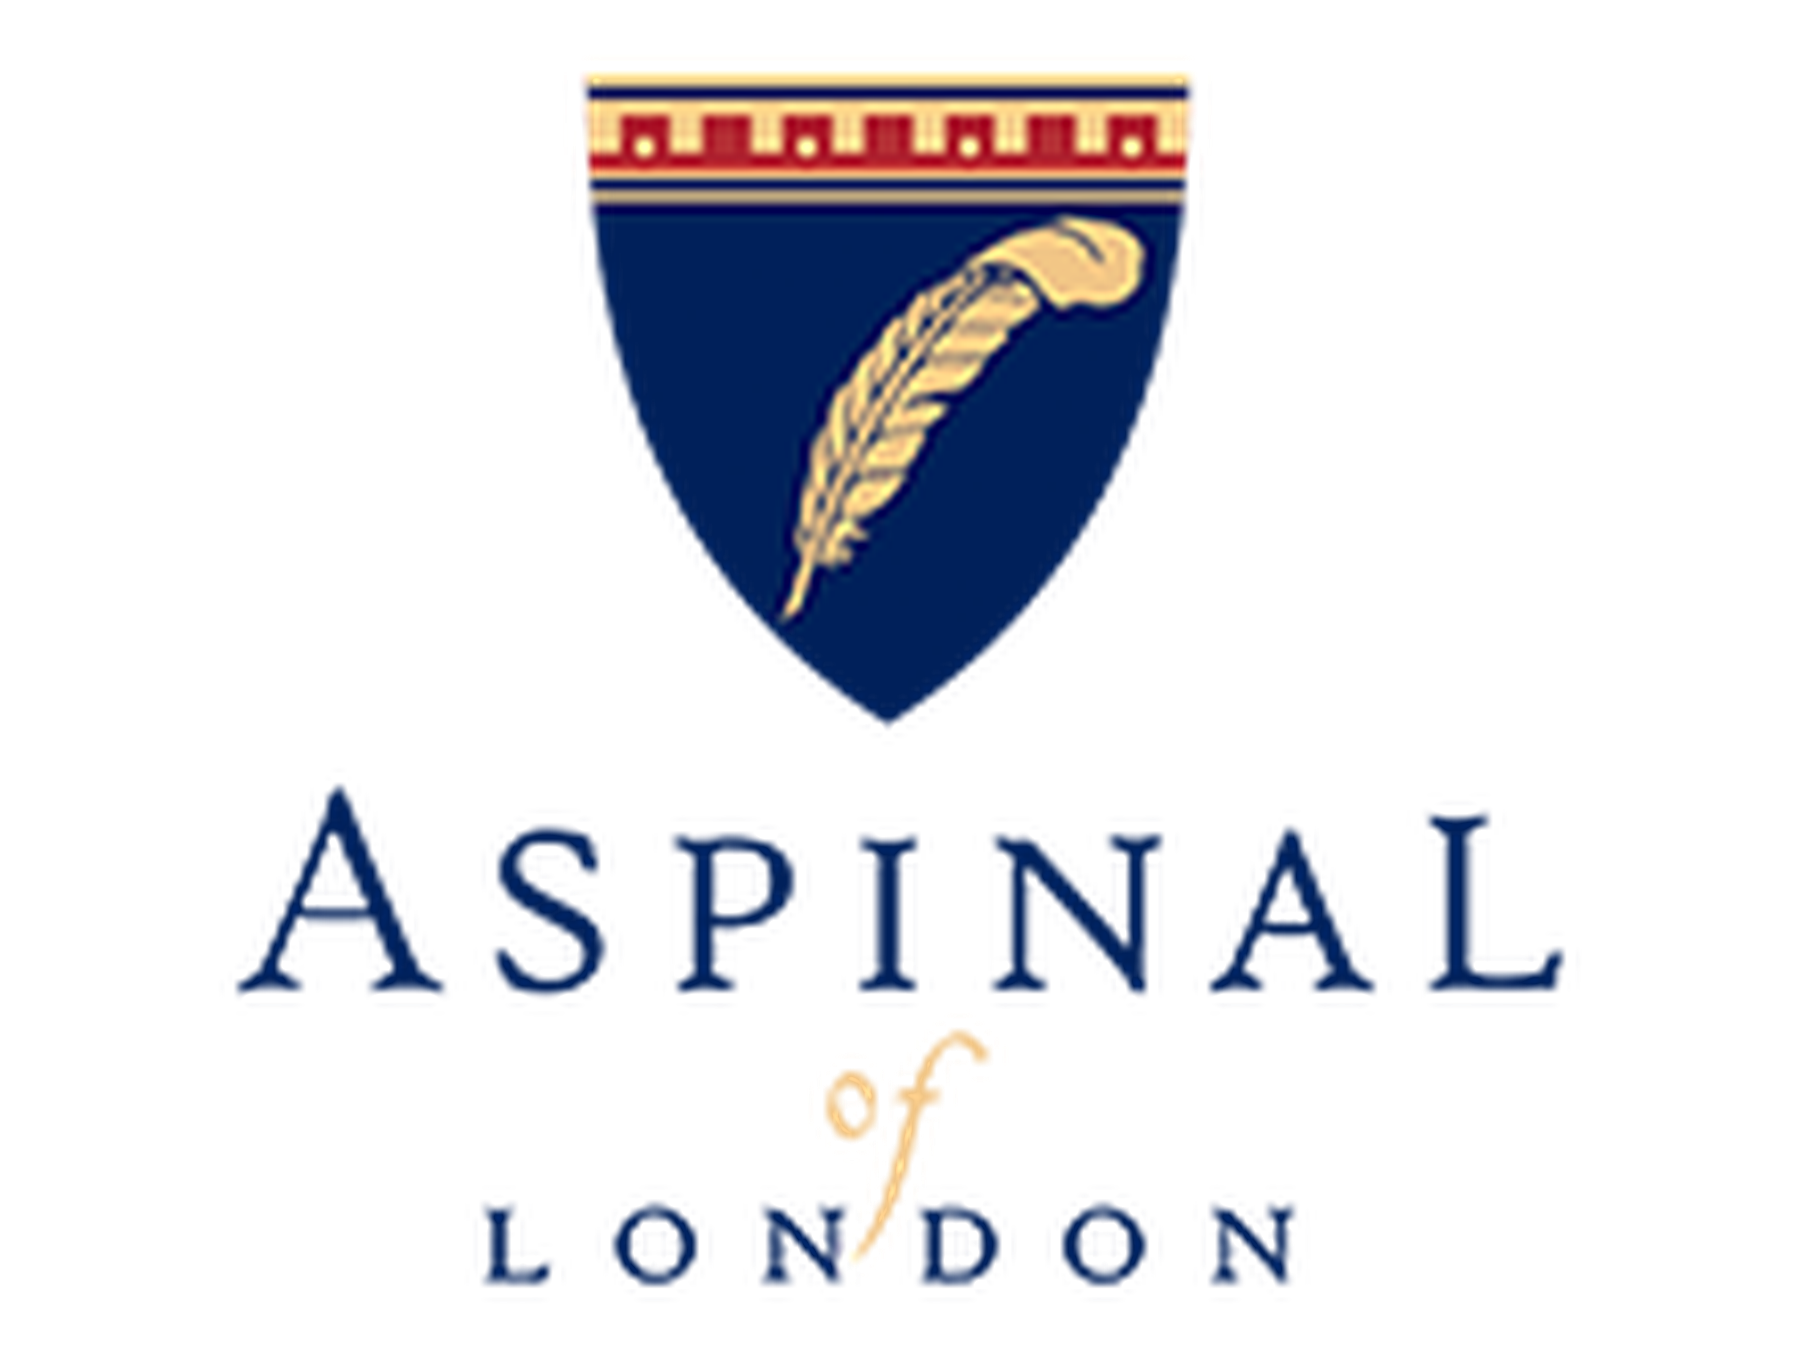 Aspinal of London discount code